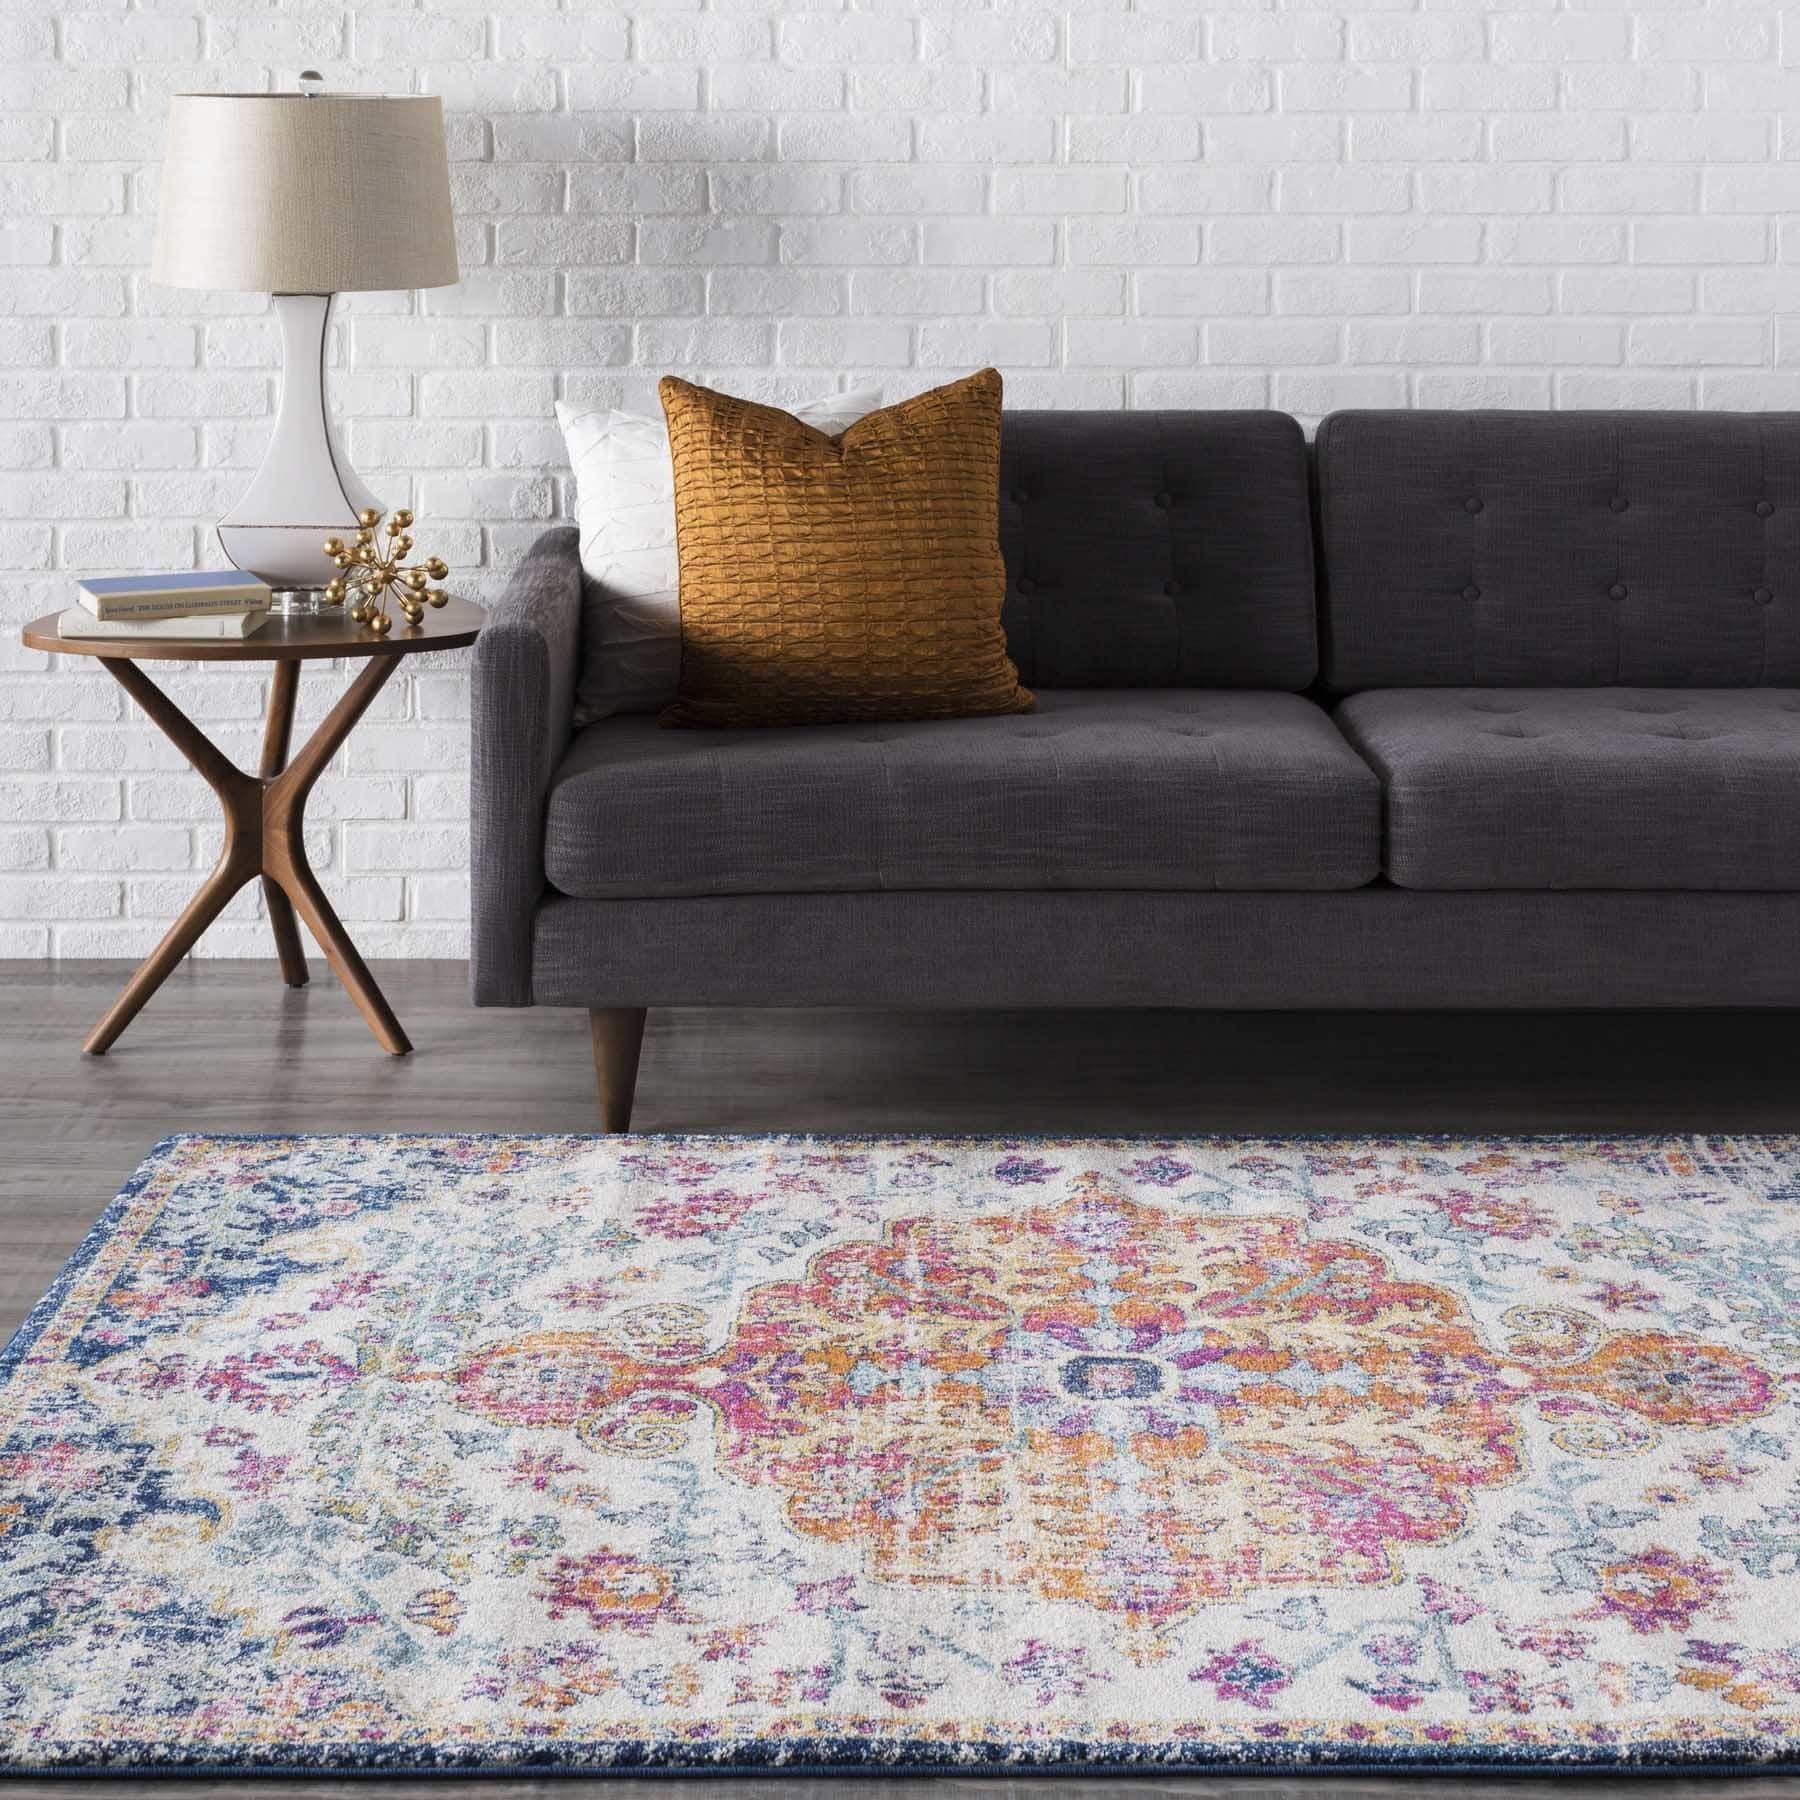 10 Best Places To Buy Cheap Rugs In 2018 Stylish Affordable Area Rugs